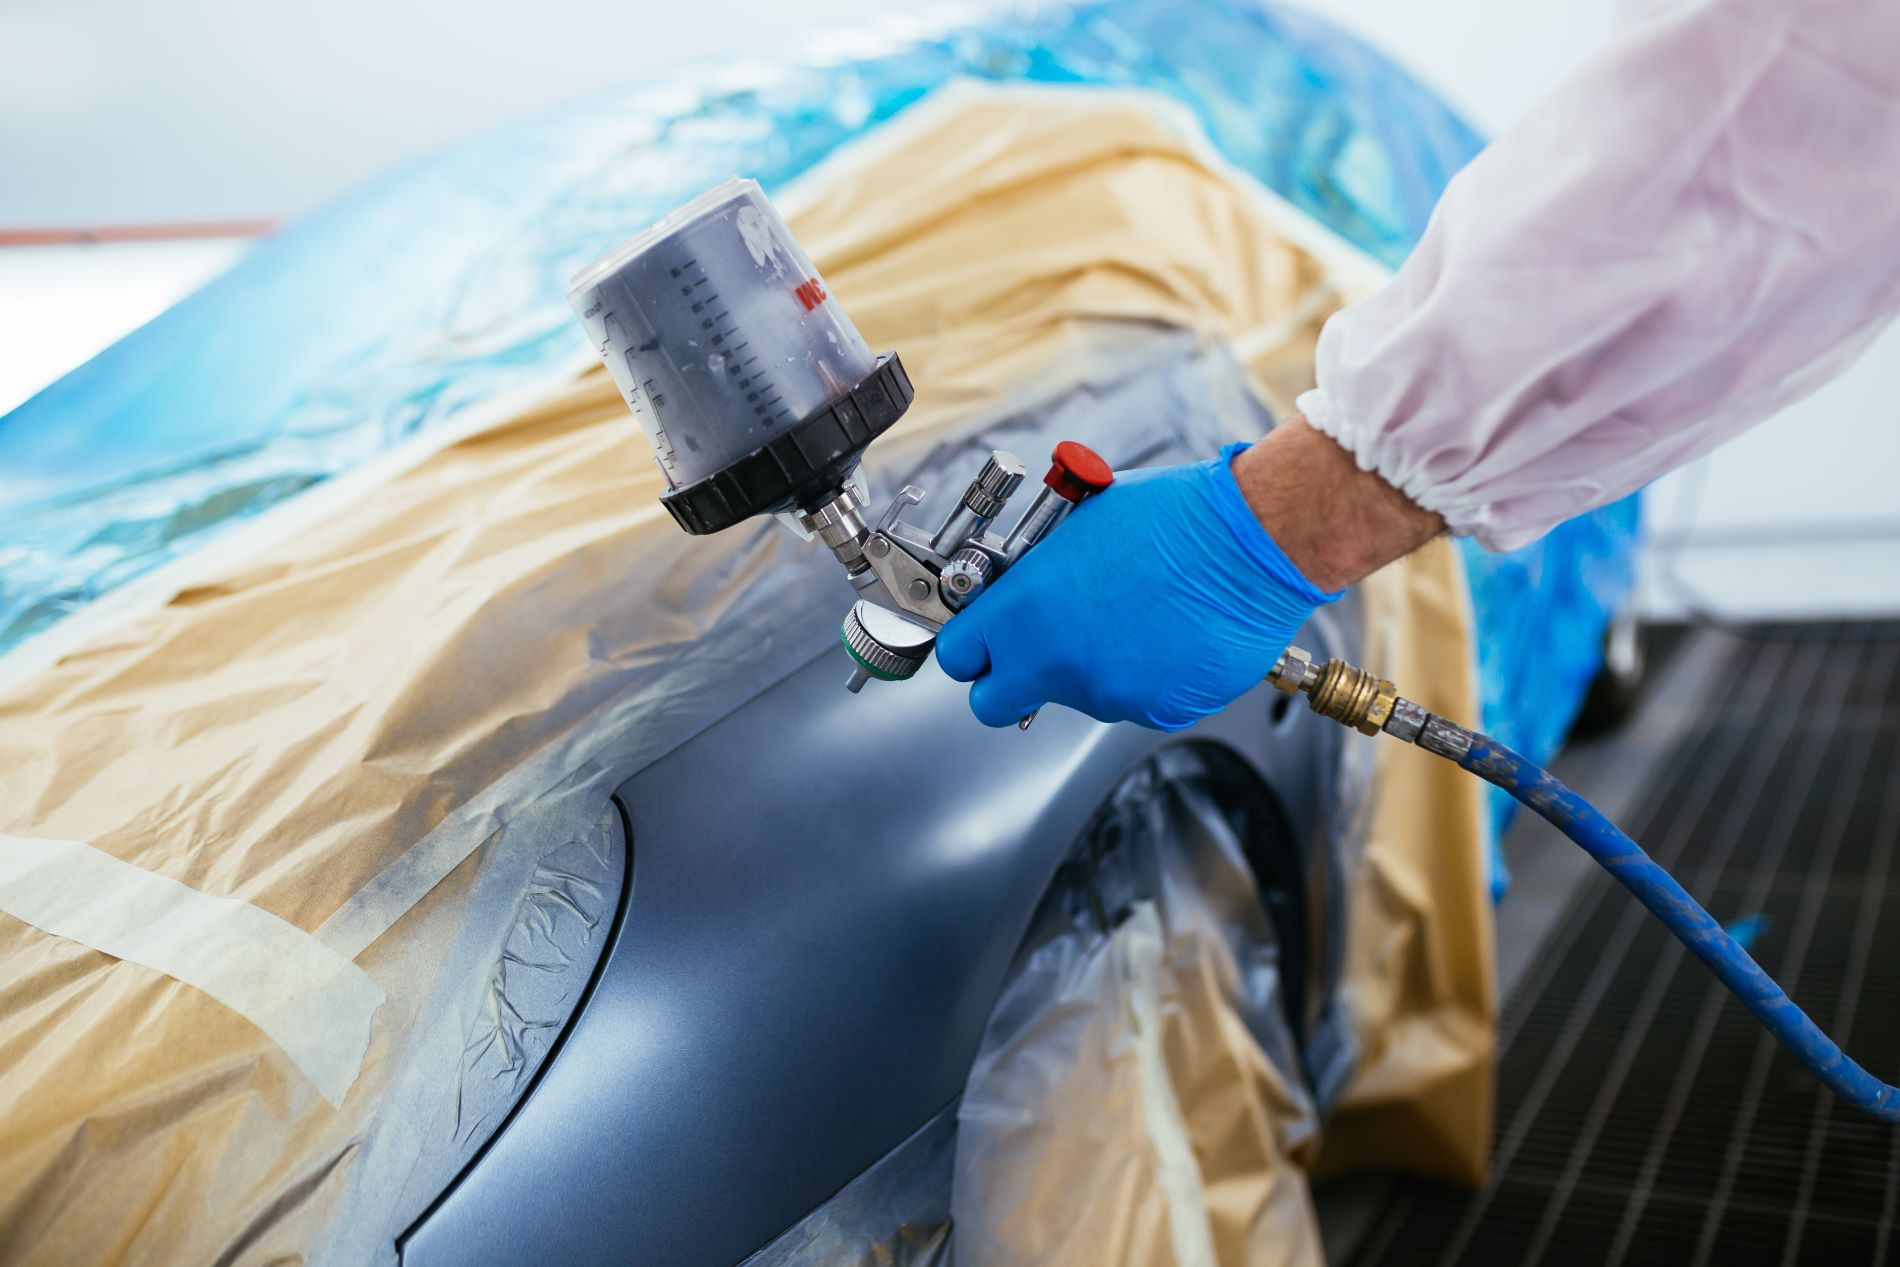 Applying Automotive Paint and touch up paint to paint chips, most quality paint shop processes include lightly sand the body, spray new paint, and apply primer.